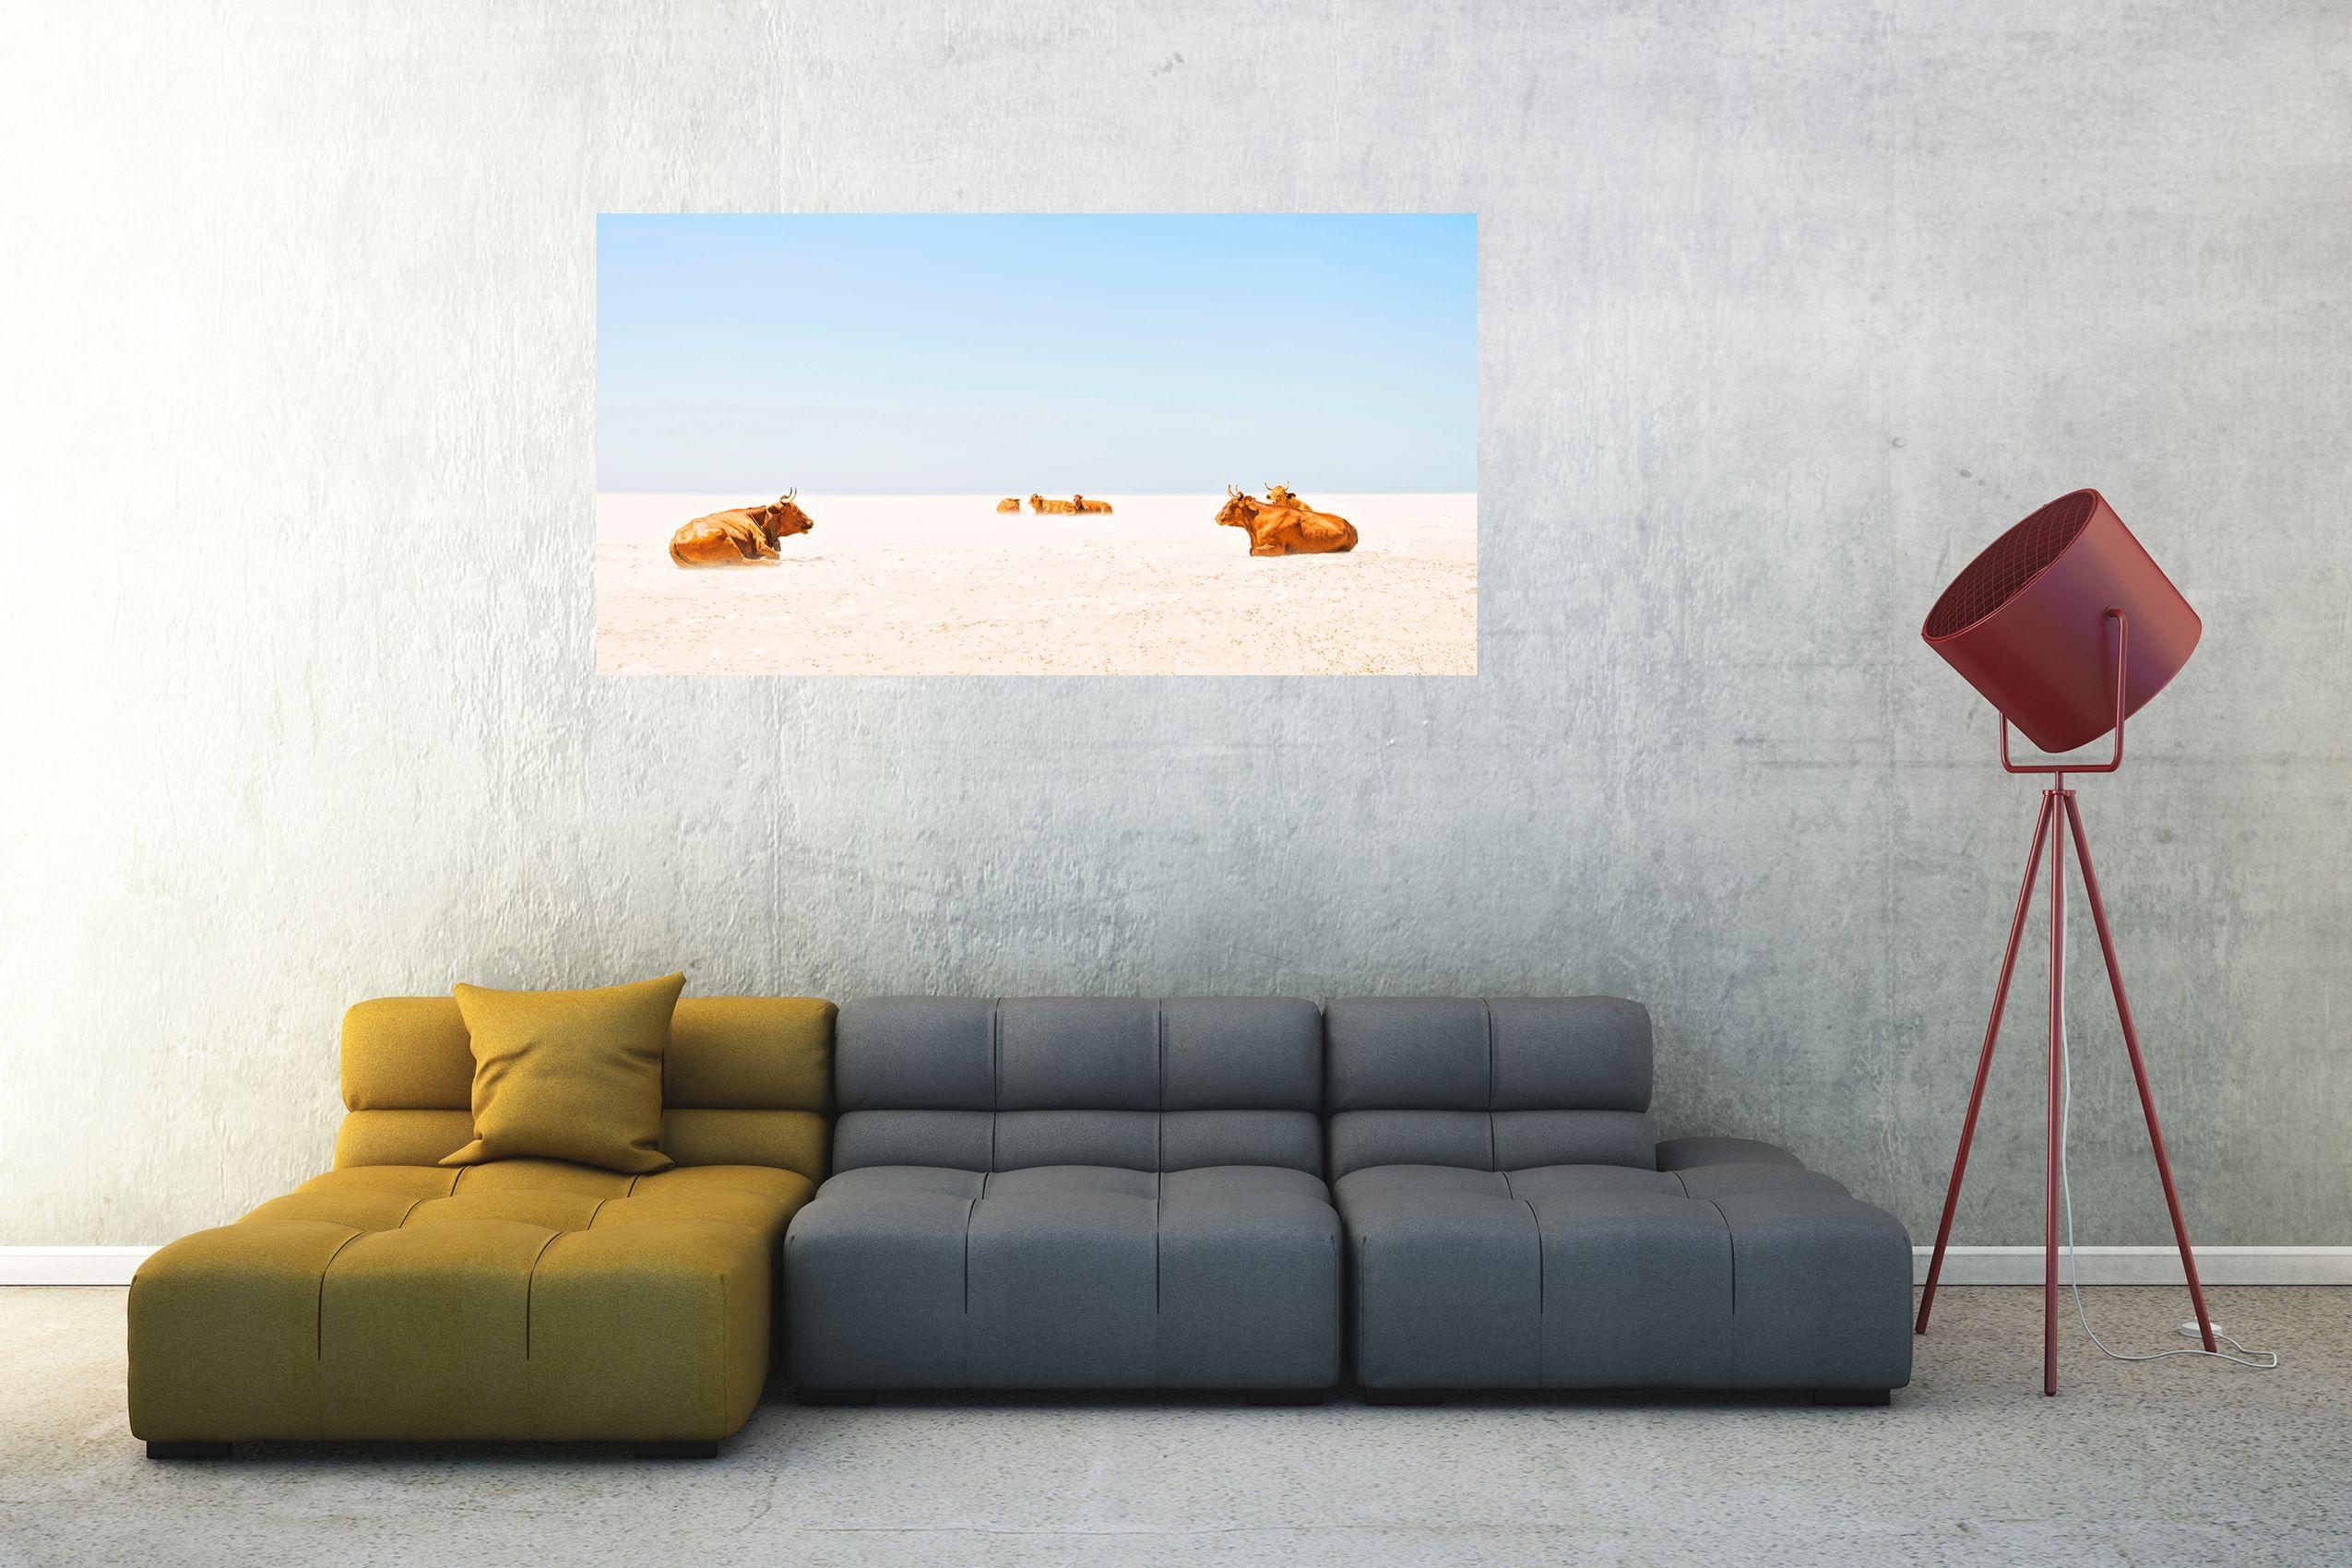 SUNBATHING COWS, Photograph, C-Type For Sale 2